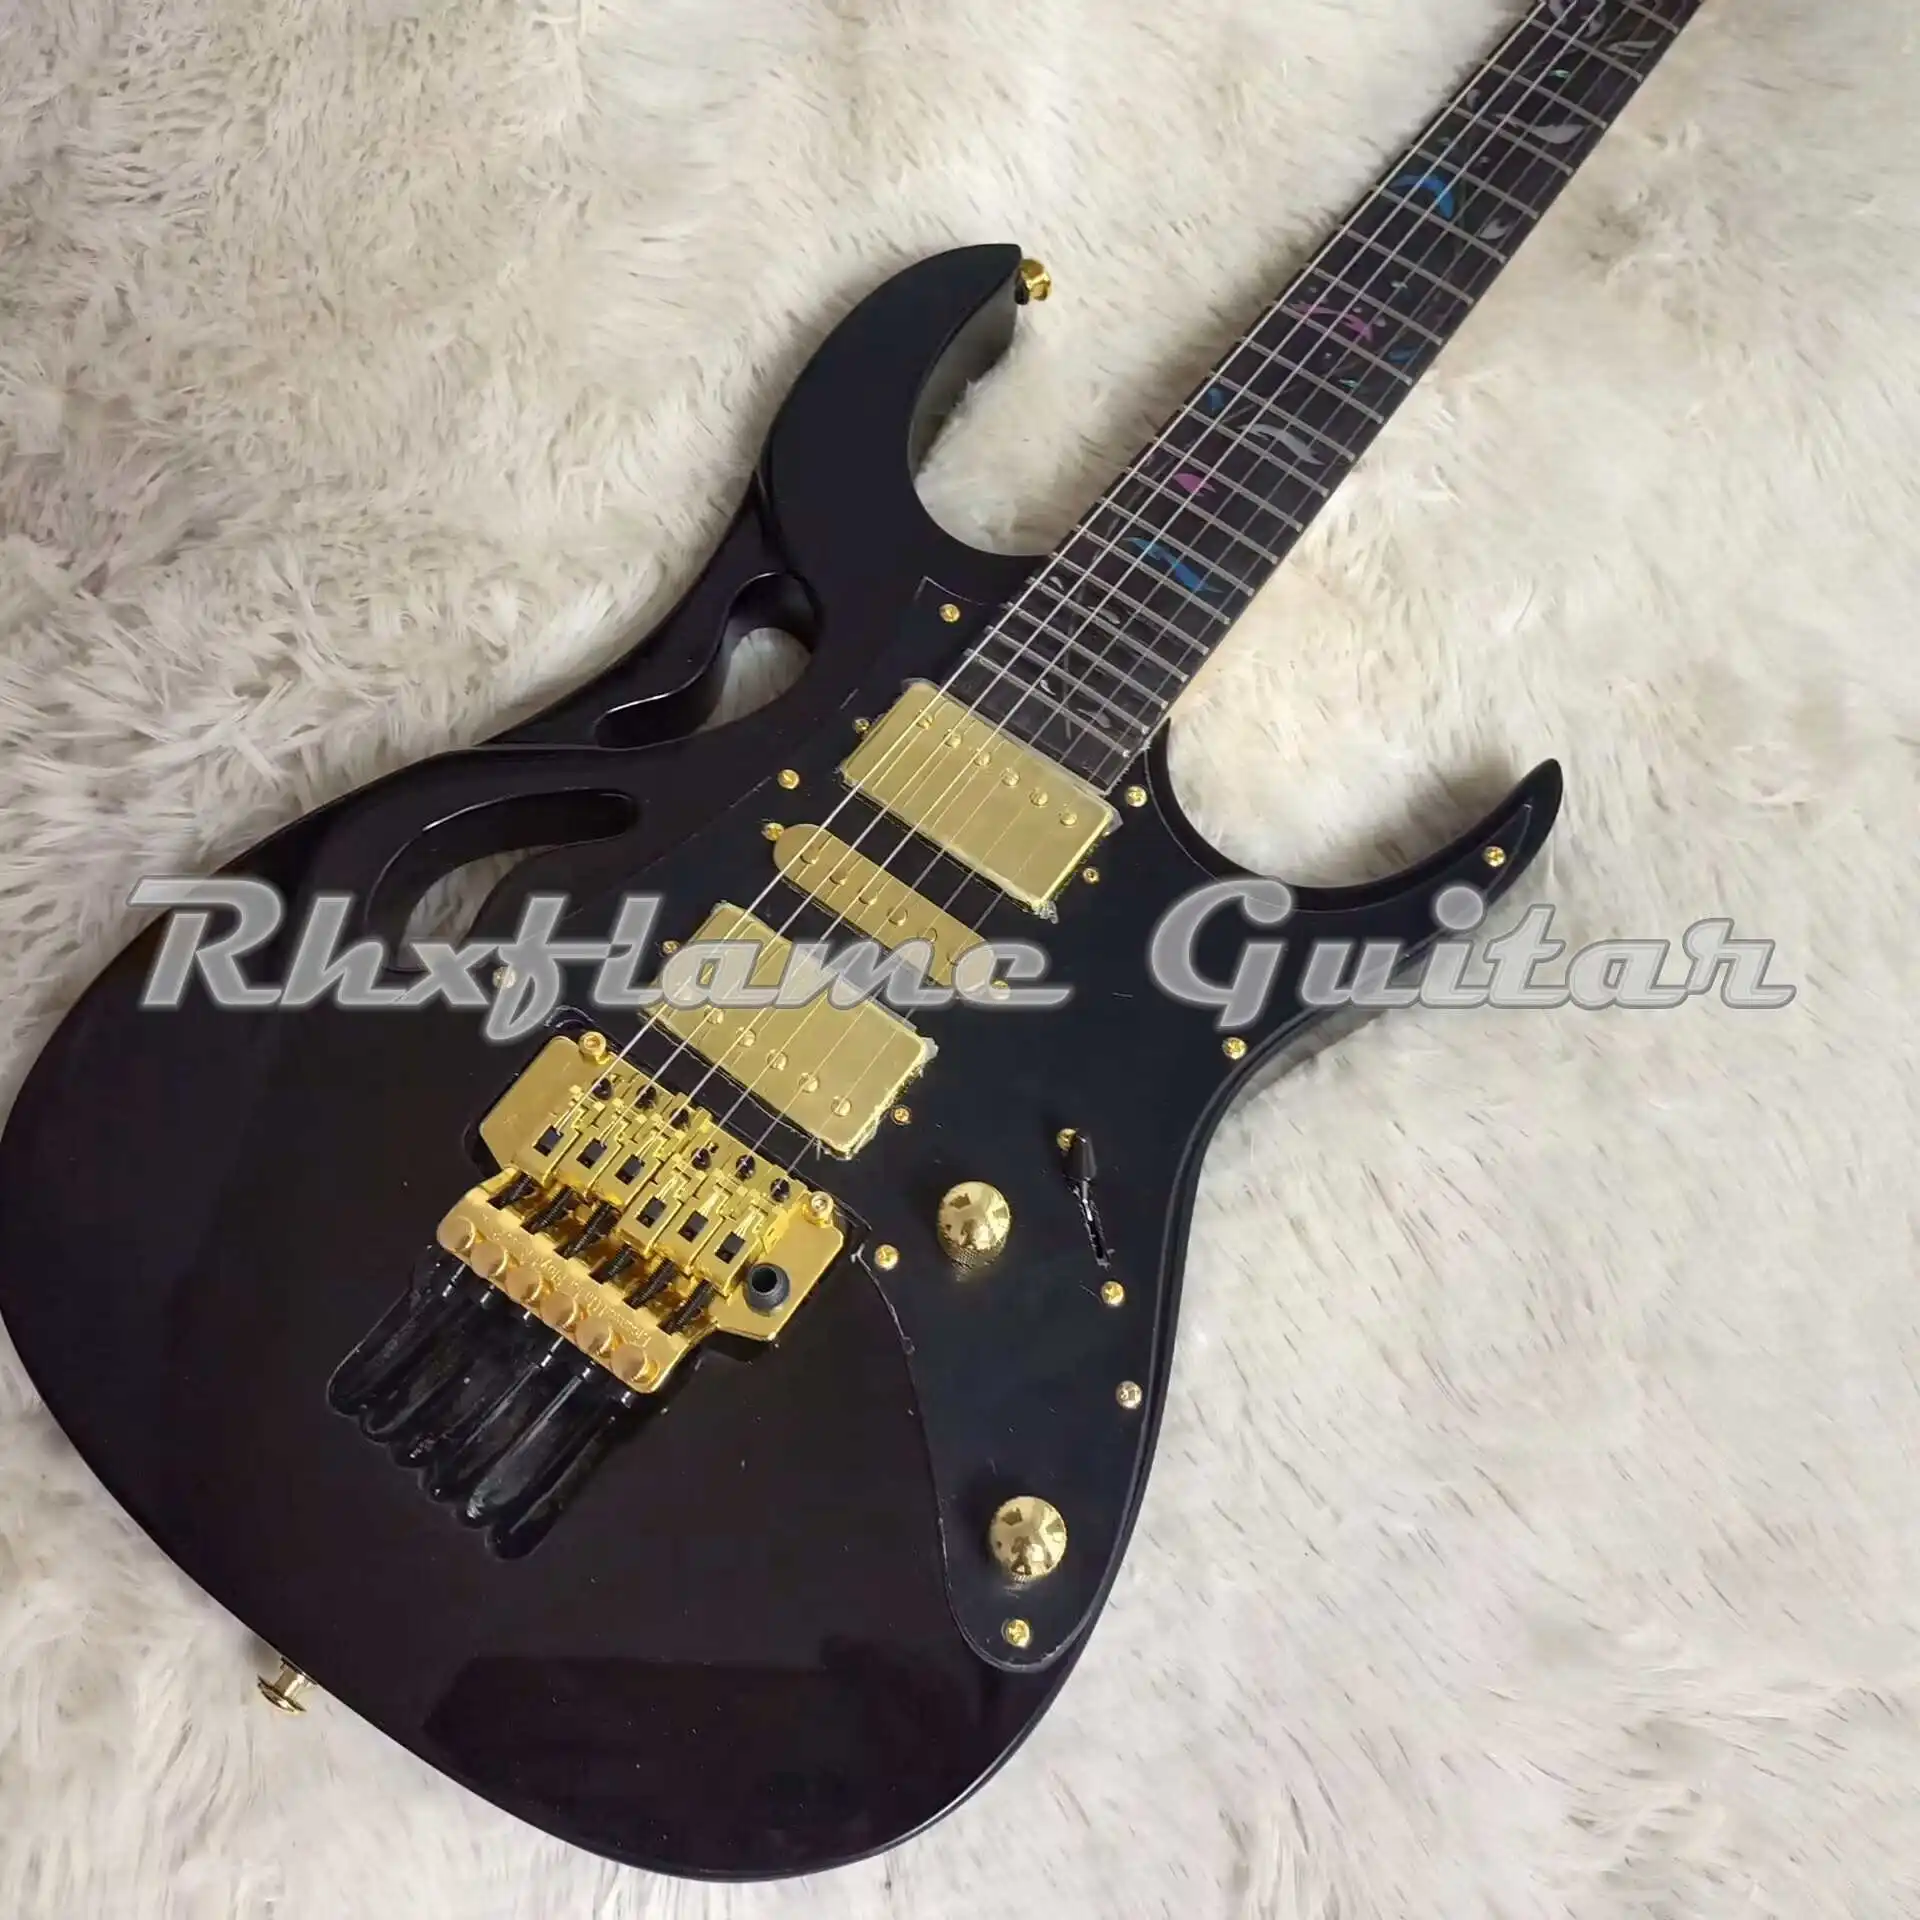 

Rhxflame Black Steve Pia 7 Electric Guitar Abalone Tree Of Life Inlay Floyd Rose Tremolo Lions Claw Cavity White Pearl Pickguard